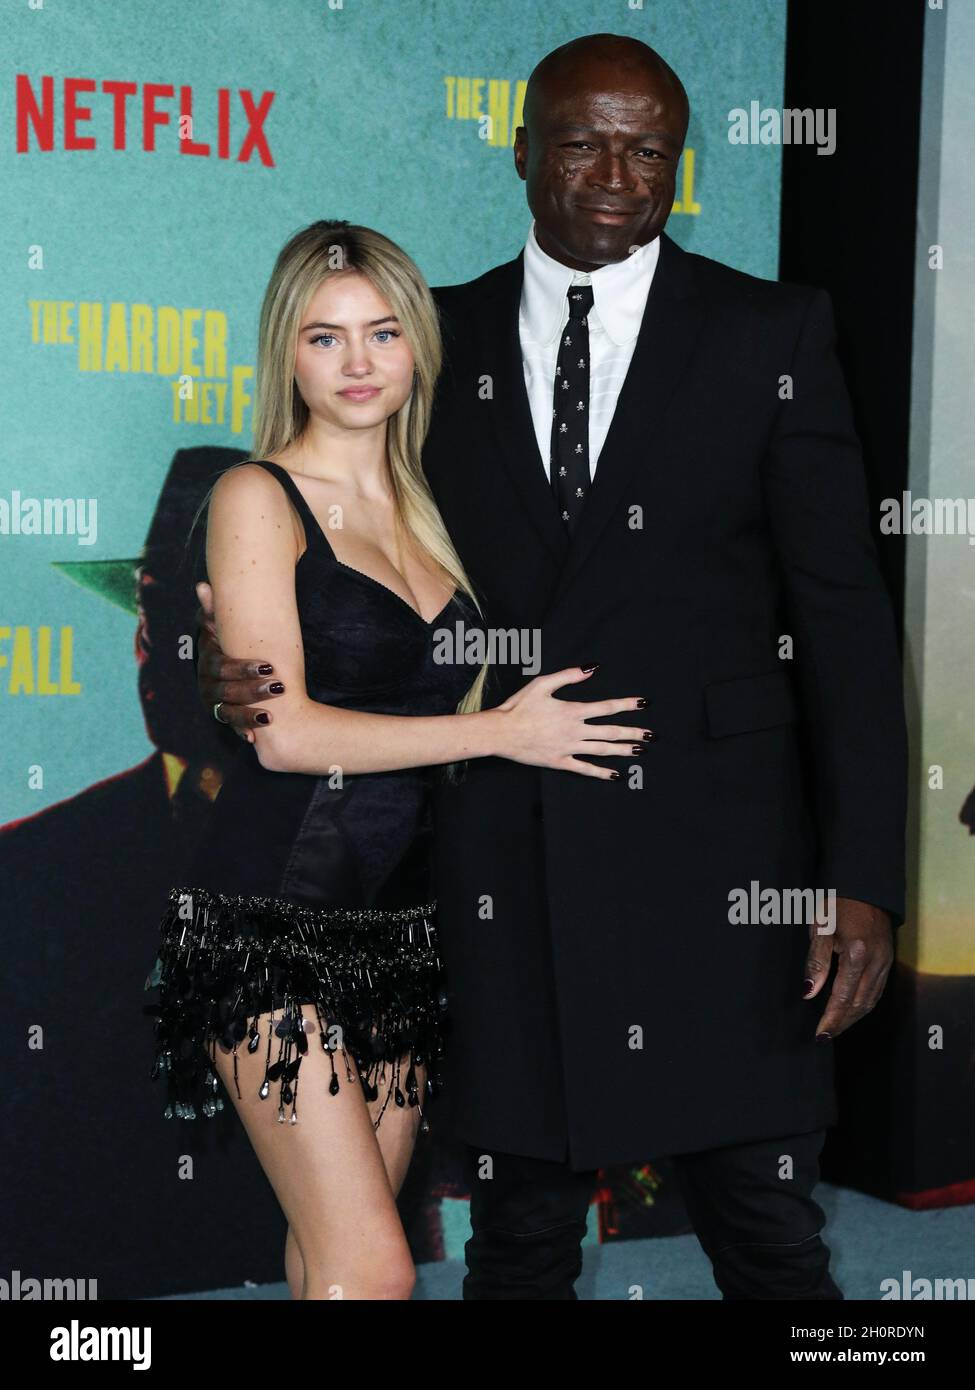 Los Angeles, United States. 13th Oct, 2021. LOS ANGELES, CALIFORNIA, USA - OCTOBER 13: Model Leni Olumi Klum and singer-songwriter Seal (Henry Olusegun Adeola Samuel) arrive at the Los Angeles Premiere Of Netflix's 'The Harder They Fall' held at the Shrine Auditorium and Expo Hall on October 13, 2021 in Los Angeles, California, United States. (Photo by Xavier Collin/Image Press Agency/Sipa USA) Credit: Sipa USA/Alamy Live News Stock Photo